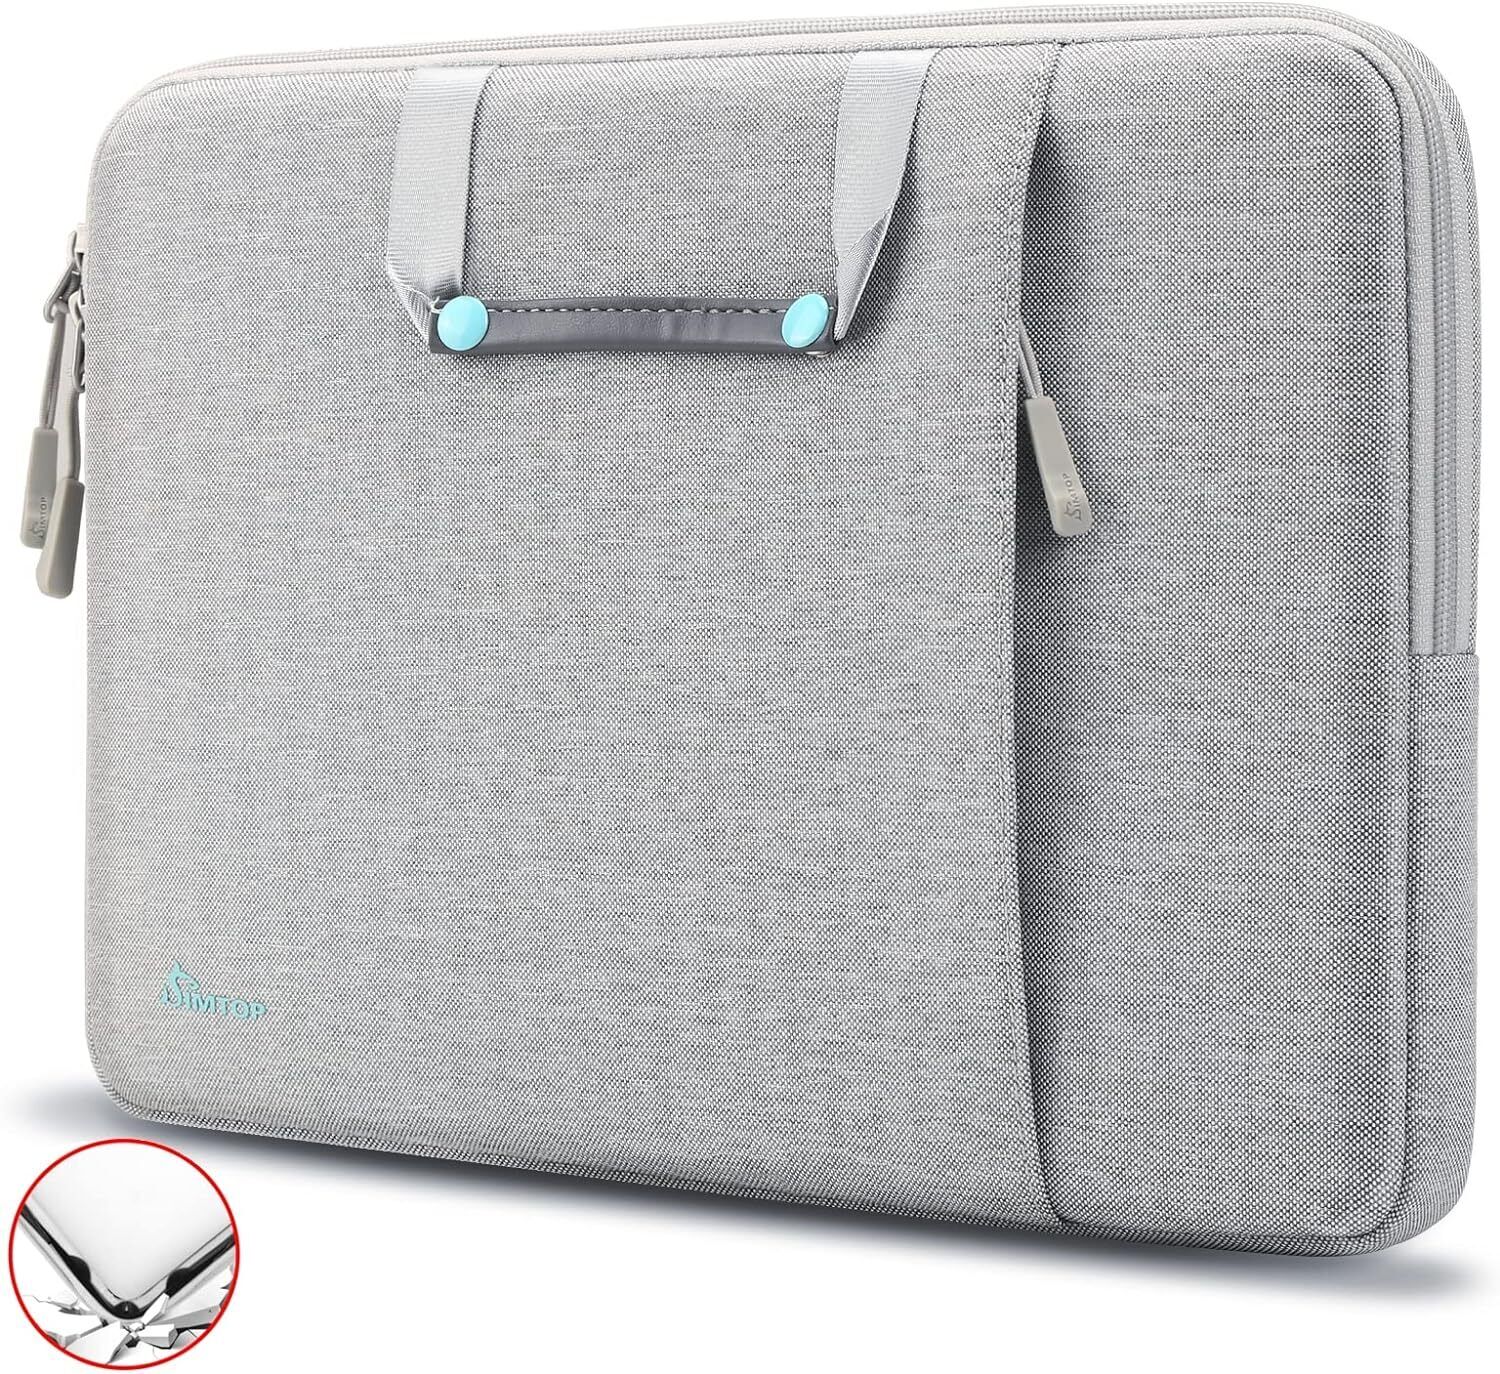 360° Protection for Your 14 15 Inch MacBook or Notebook - SIMTOP Laptop Bag